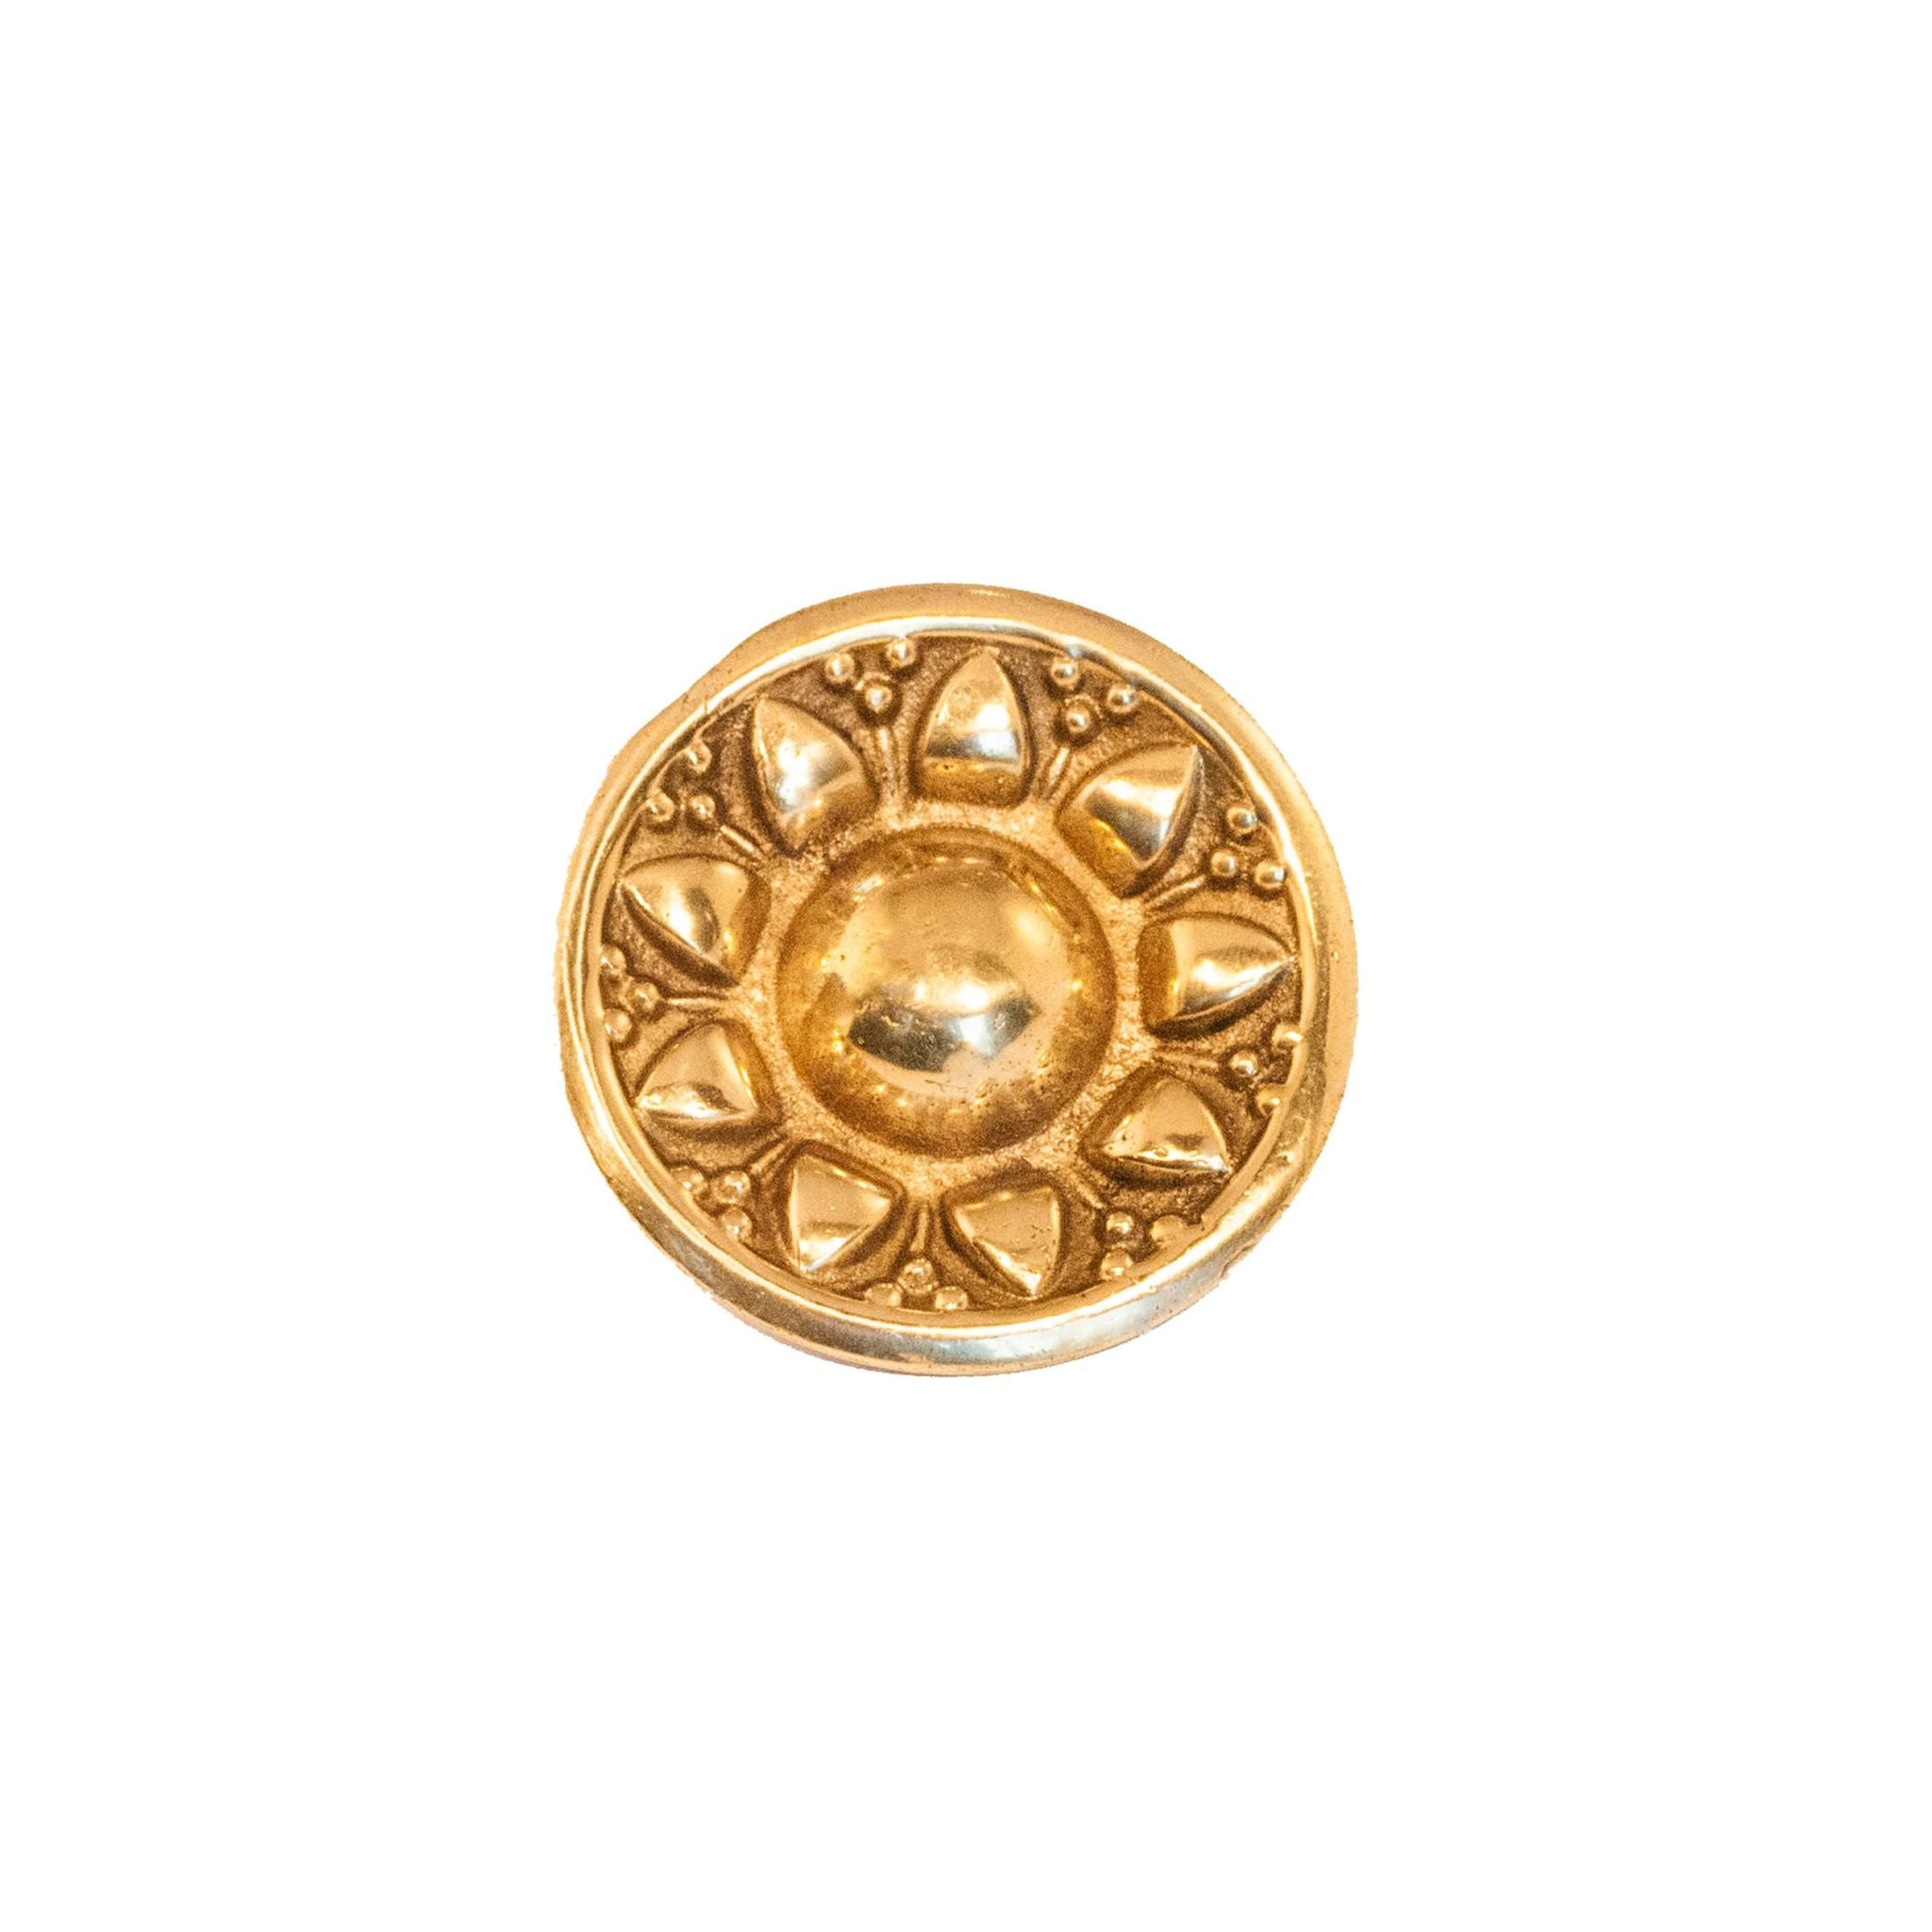 Novecento Budapest Brass Knob: A circular brass knob featuring a sun-shaped decoration, perfect for adding a touch of brilliance to your décor.